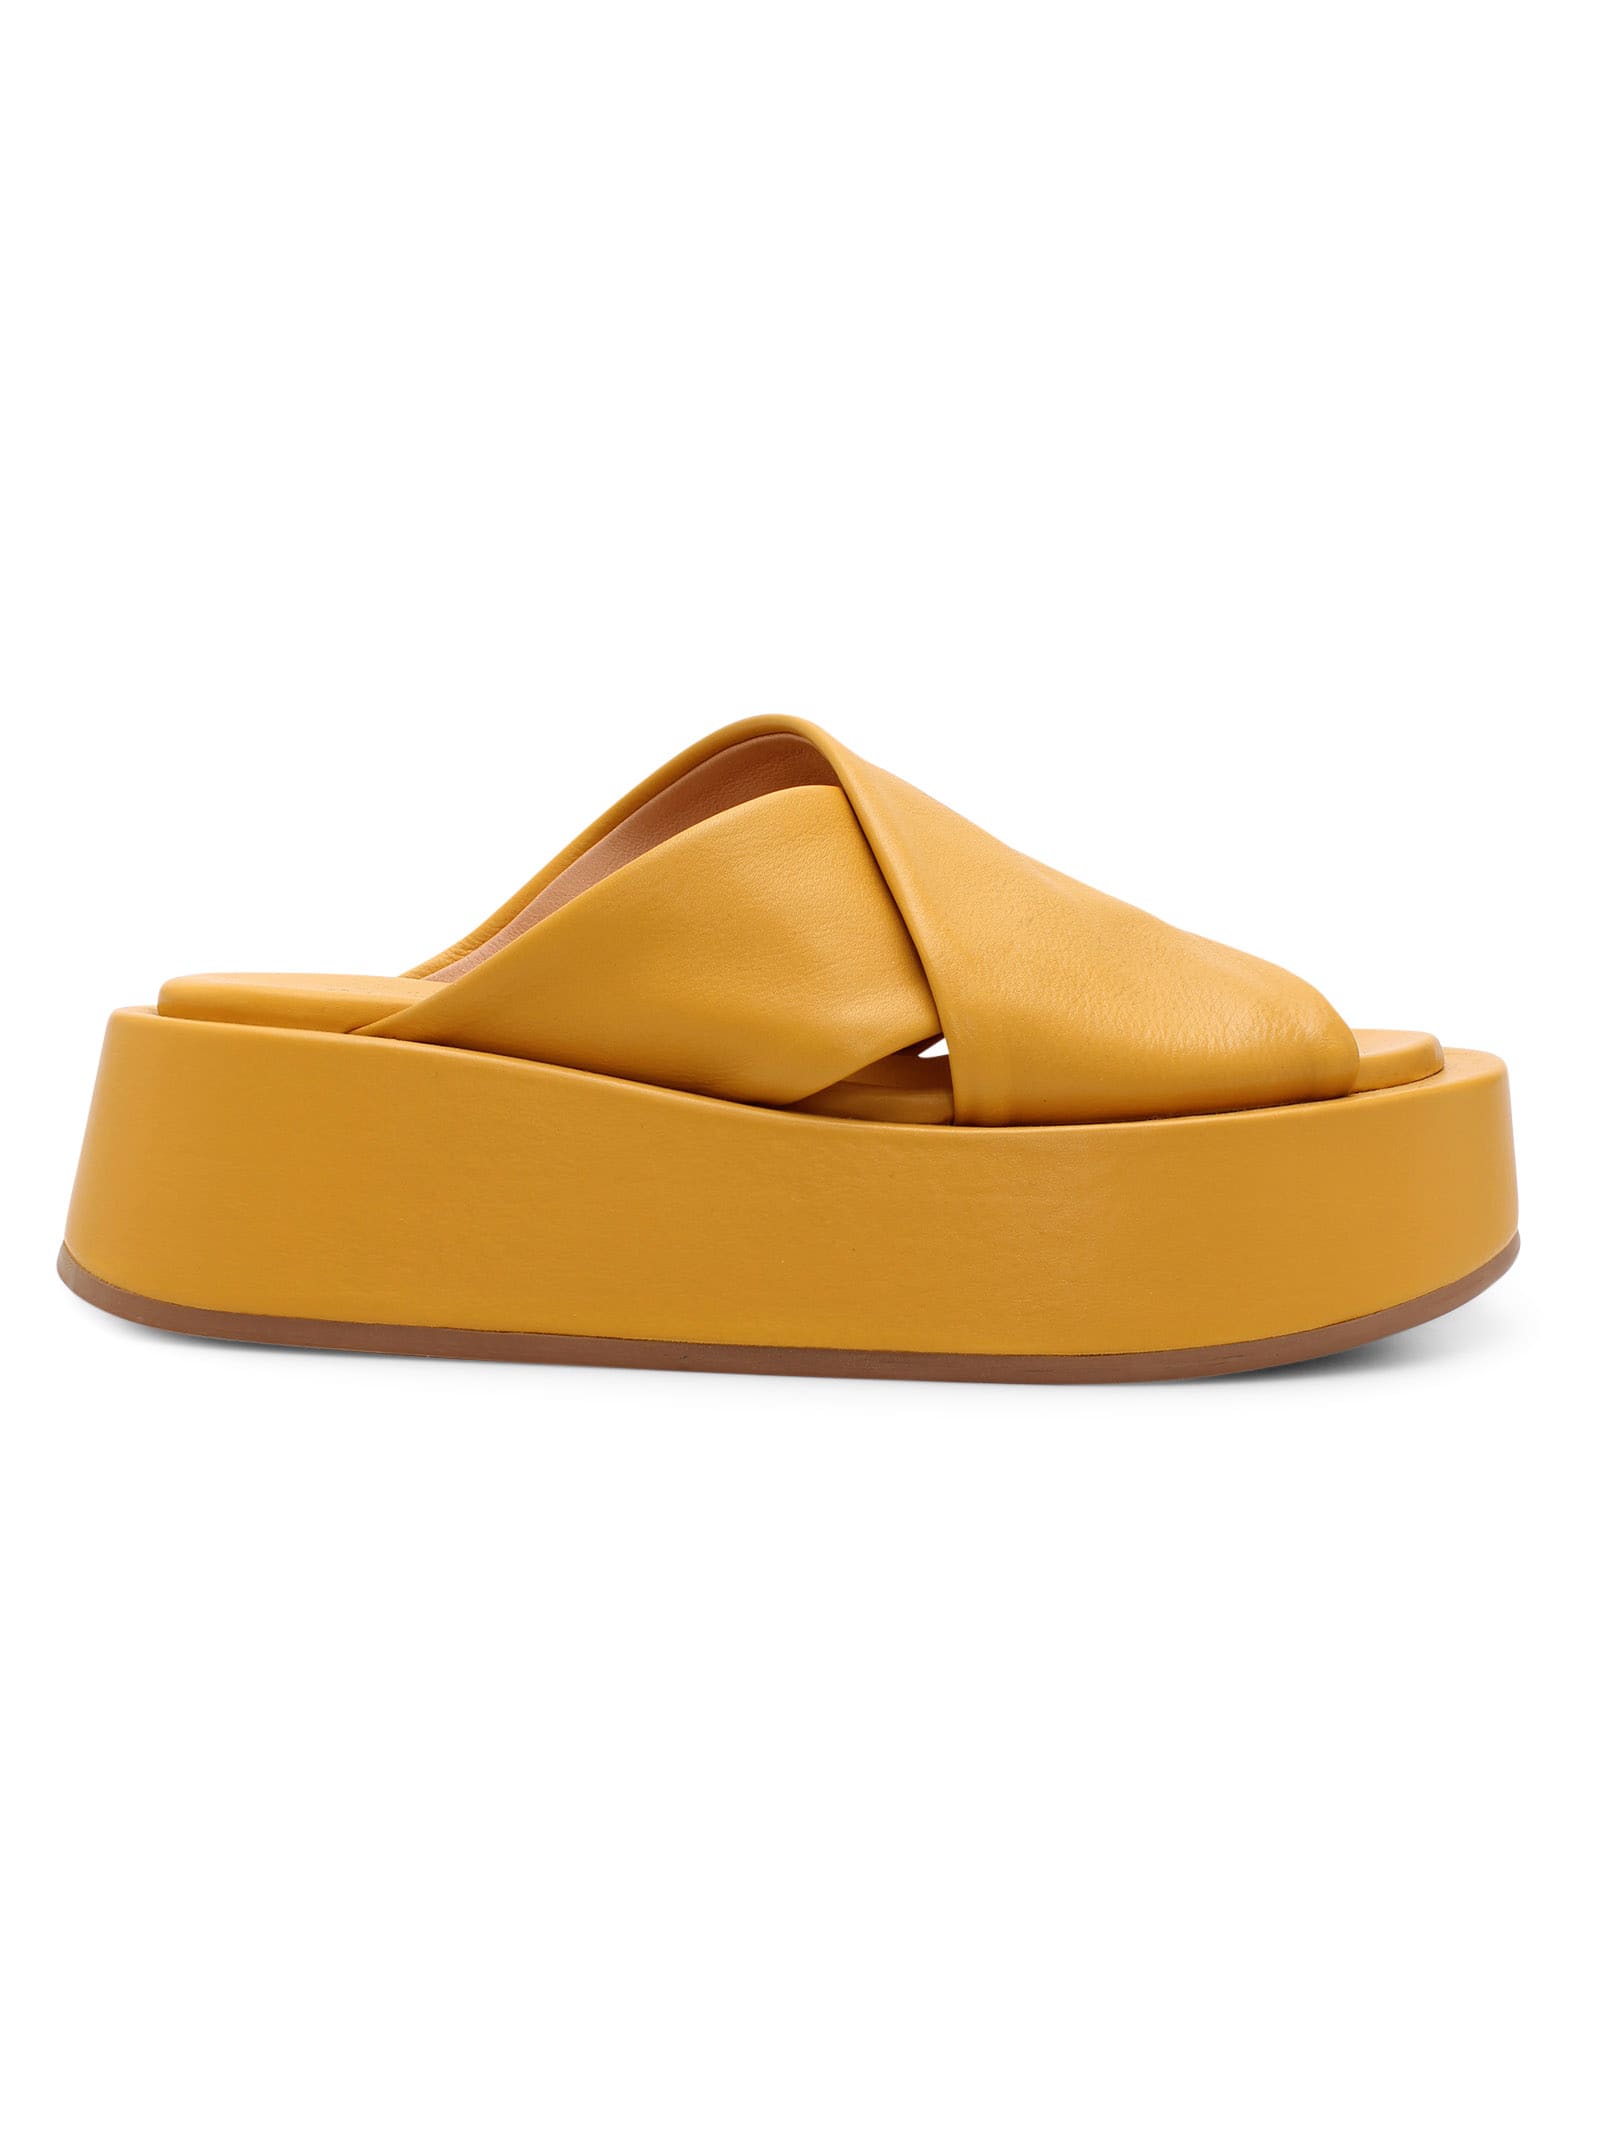 Marsell Leather Wedge Sandals